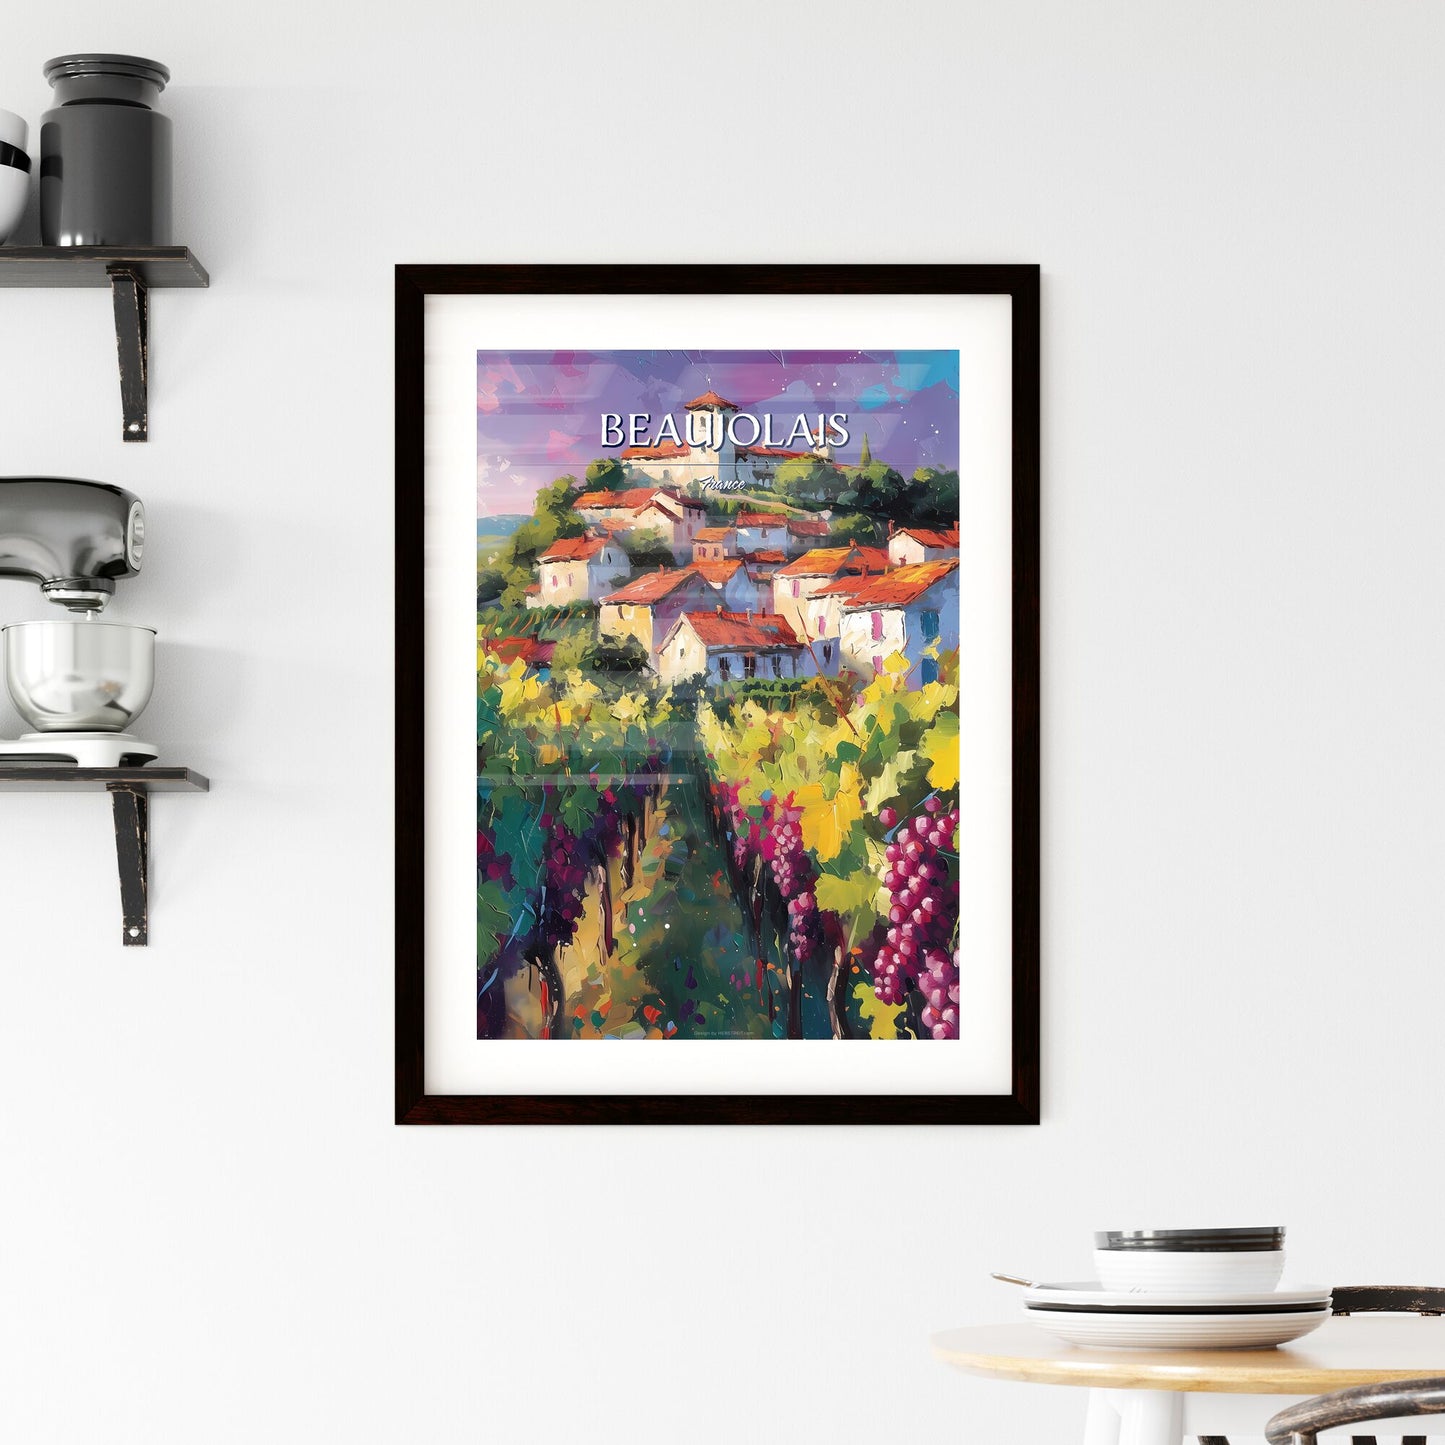 Beaujolais, France - Art print of a painting of a town on a hill with grapes Default Title